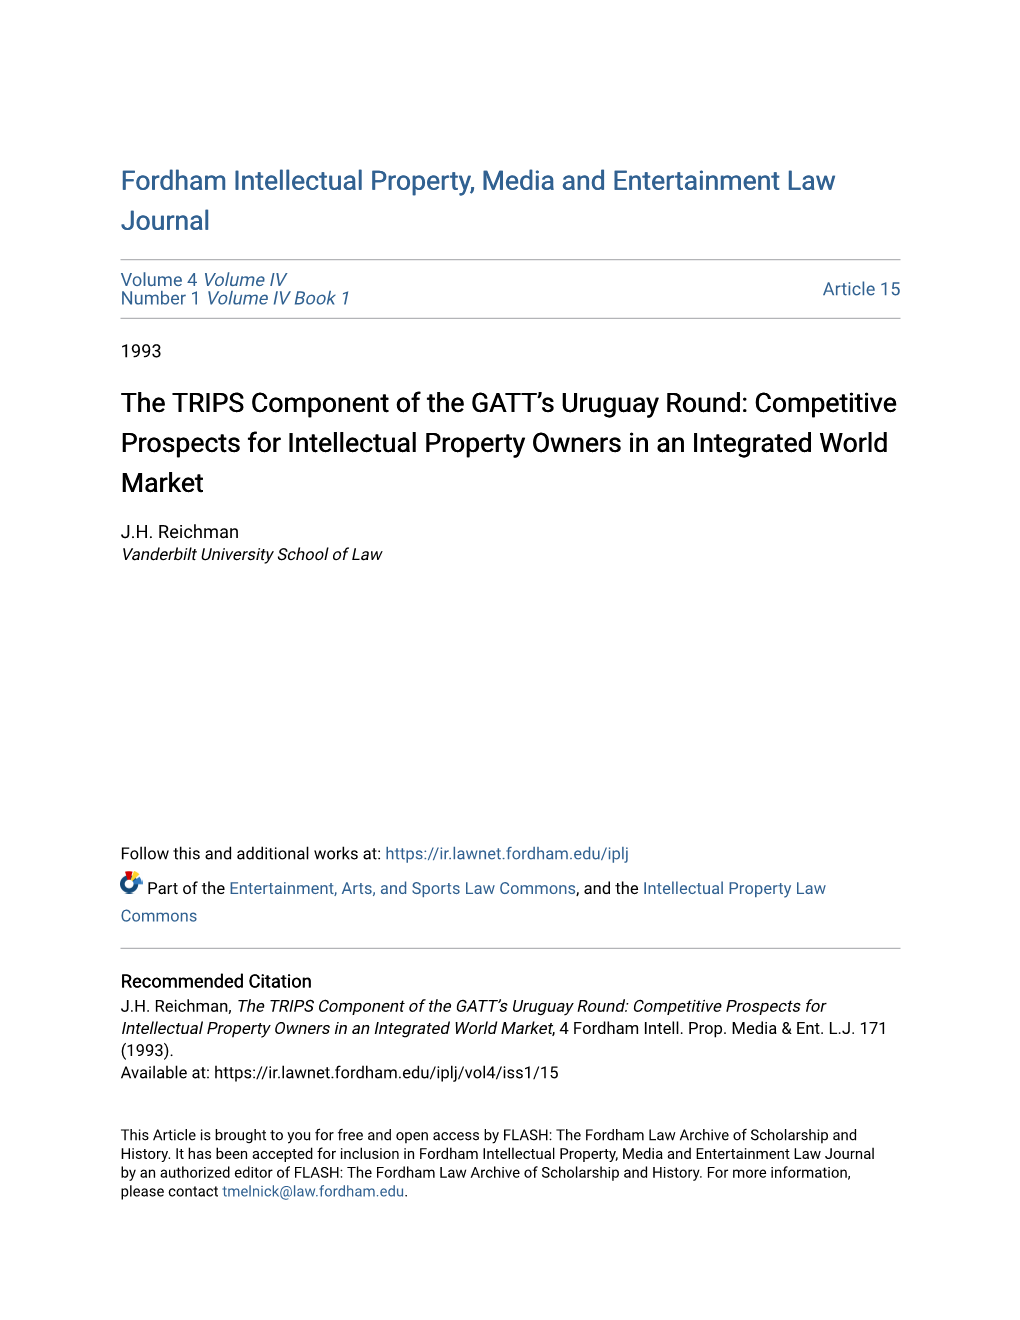 The TRIPS Component of the GATT's Uruguay Round: Competitive Pros- Pects for Intellectual Property Owners in an Integrated World Market'